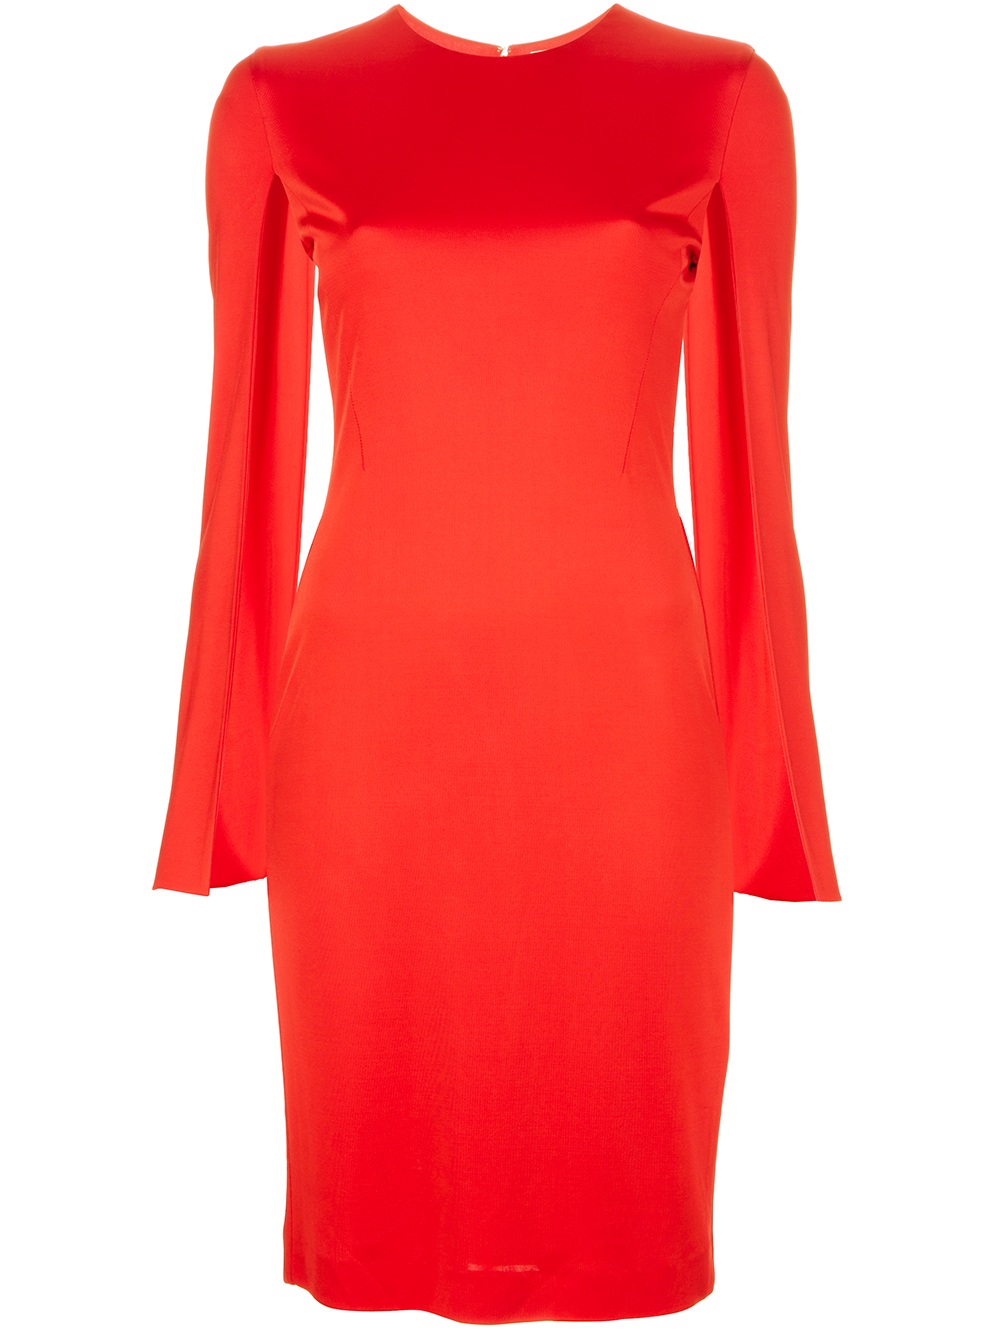 Givenchy Fitted Midi Dress in Red - Lyst